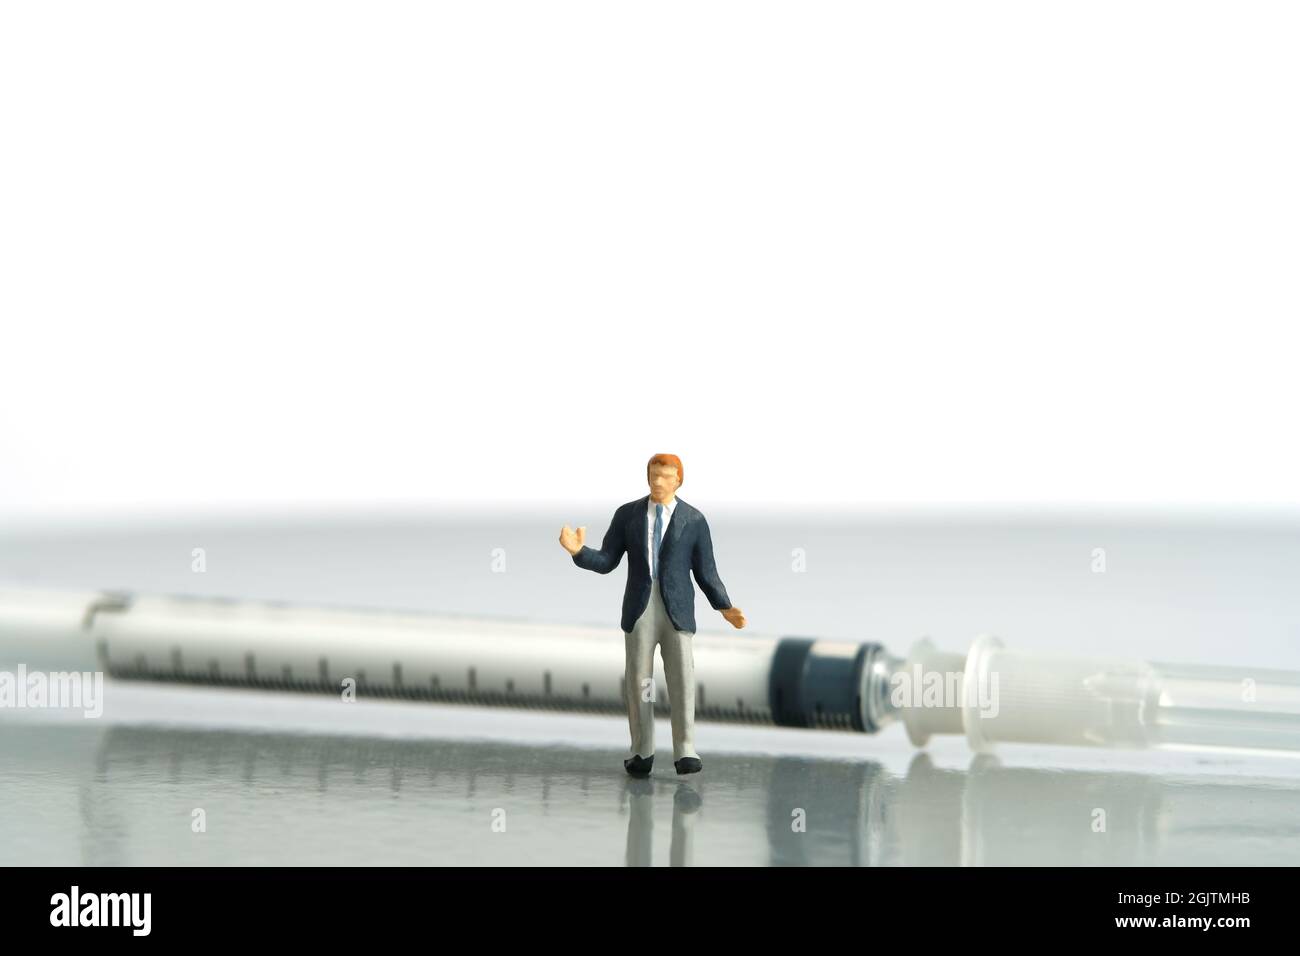 Miniature people toy figure photography. Hesitation on vaccination concept. A shrugging businessman standing in front of syringe vaccine. Isolated on Stock Photo